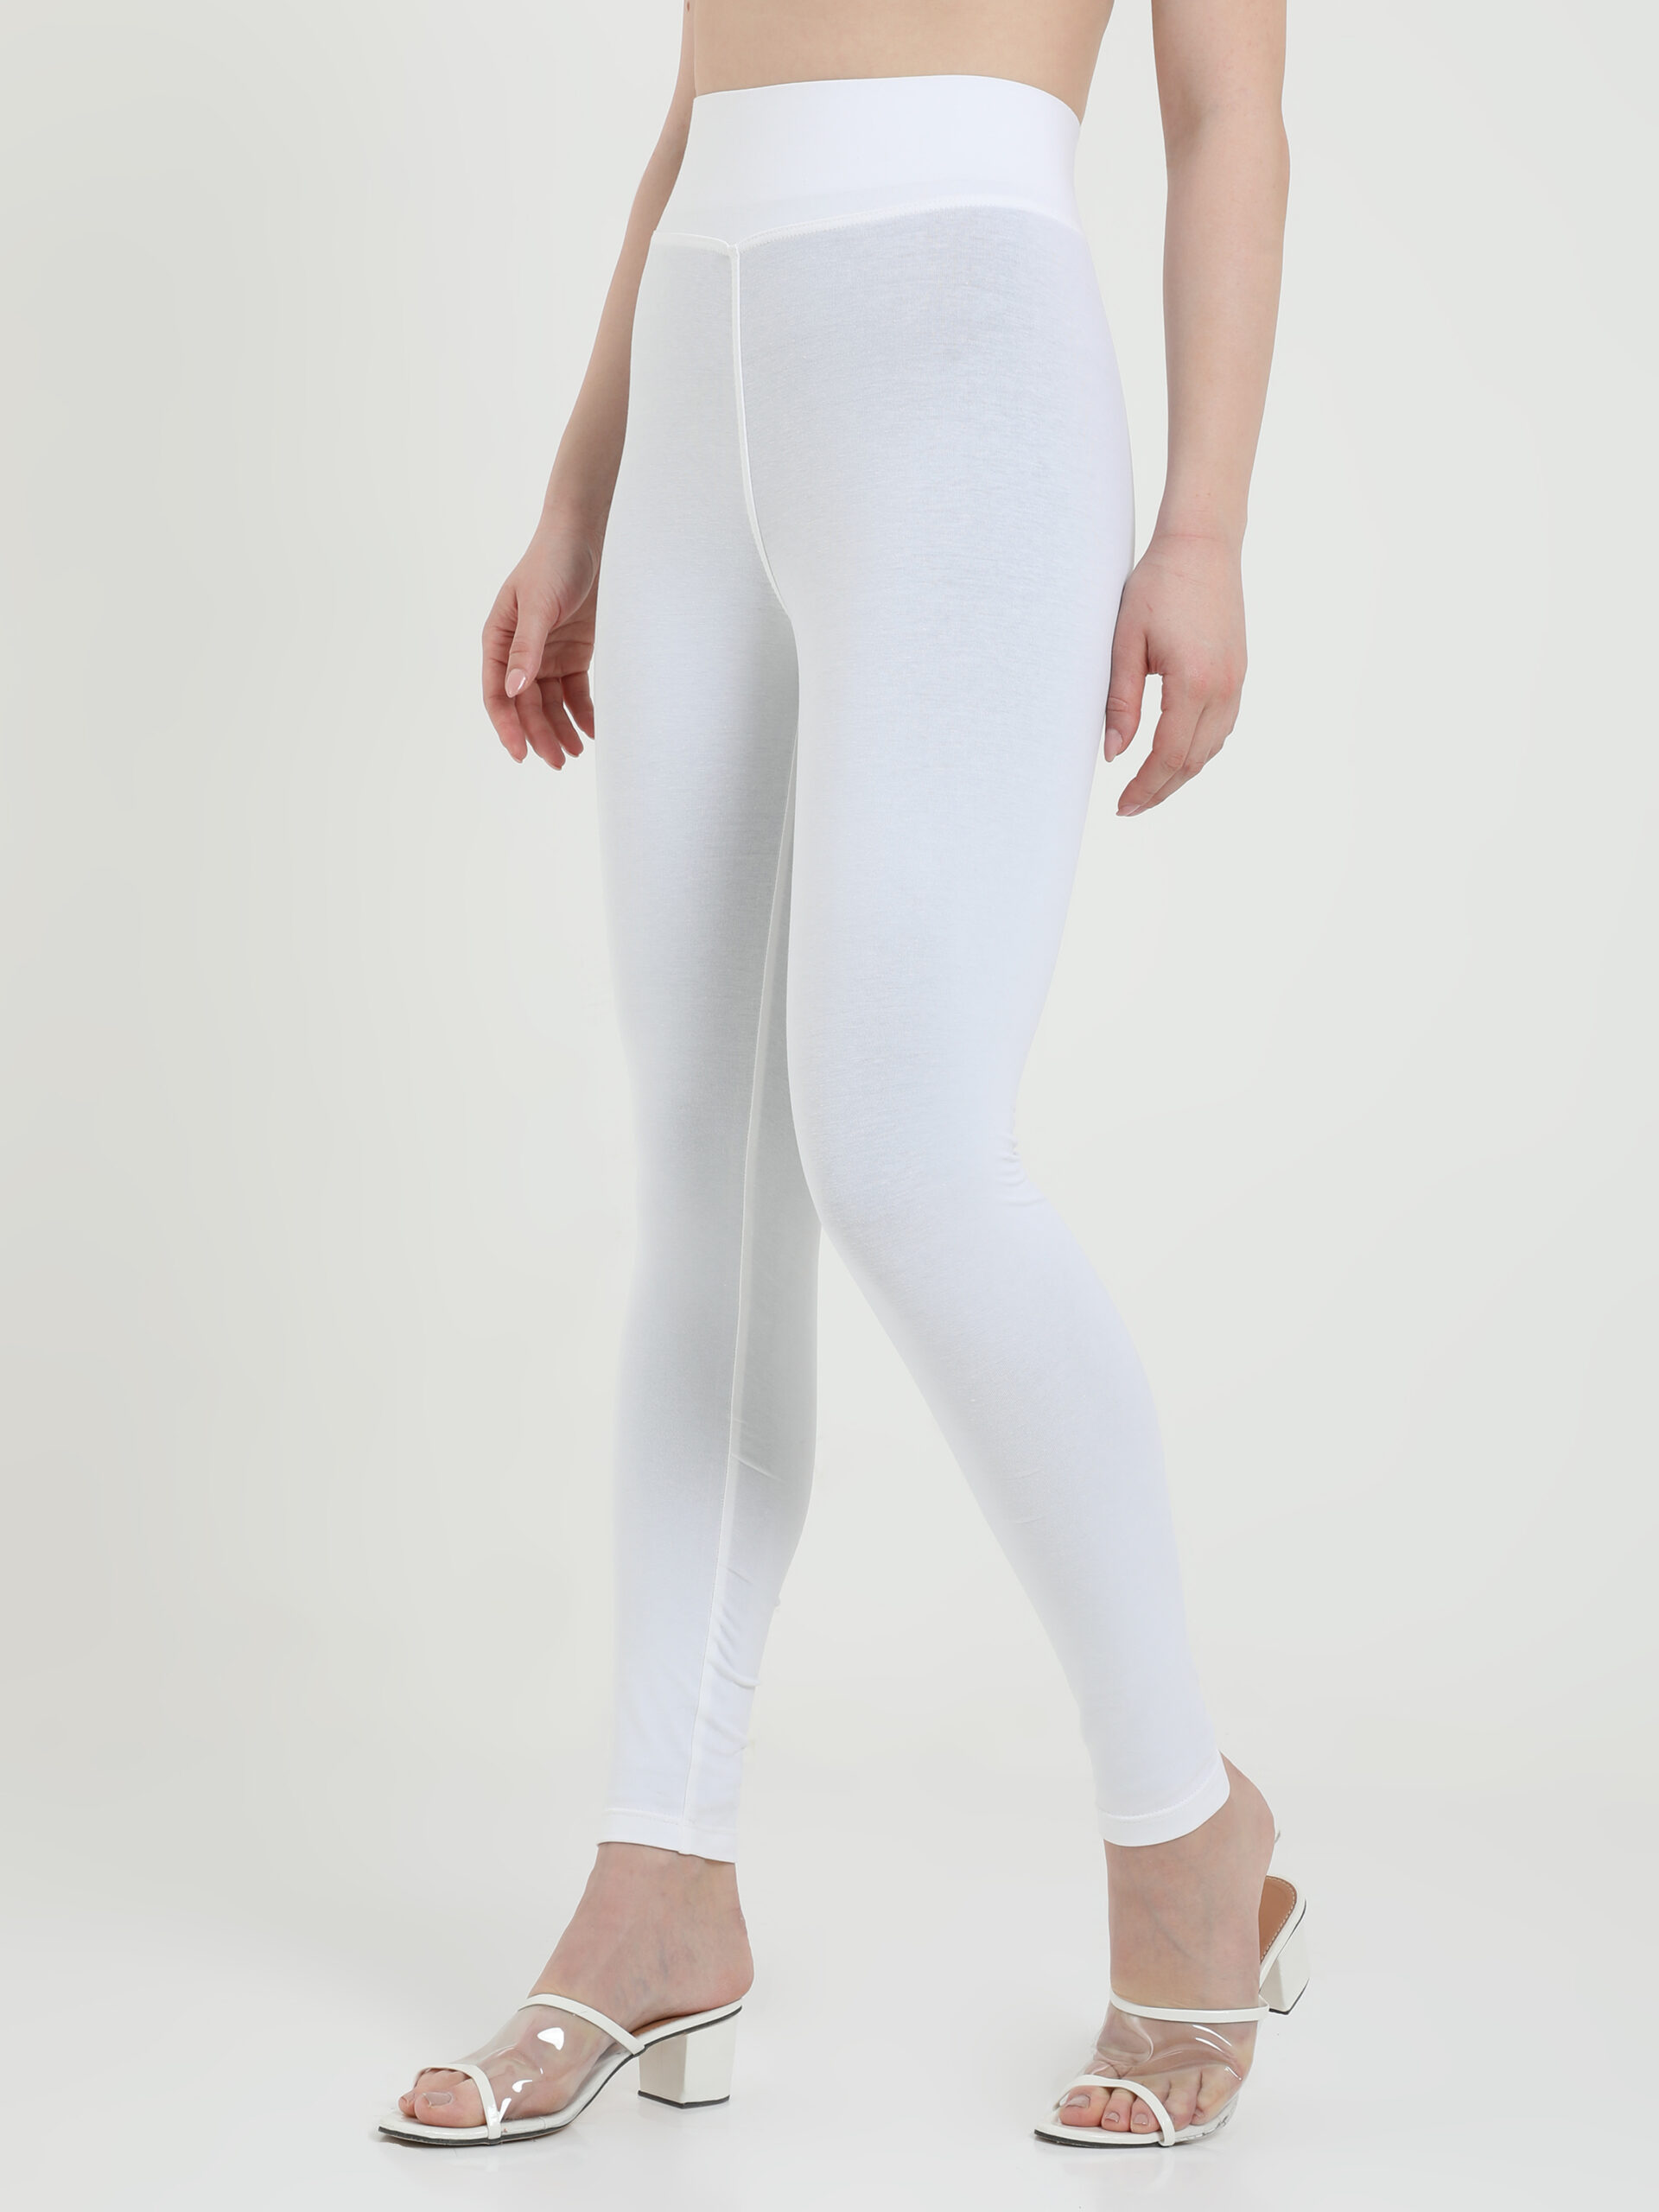 How To Style White Leggings | International Society of Precision Agriculture-anthinhphatland.vn